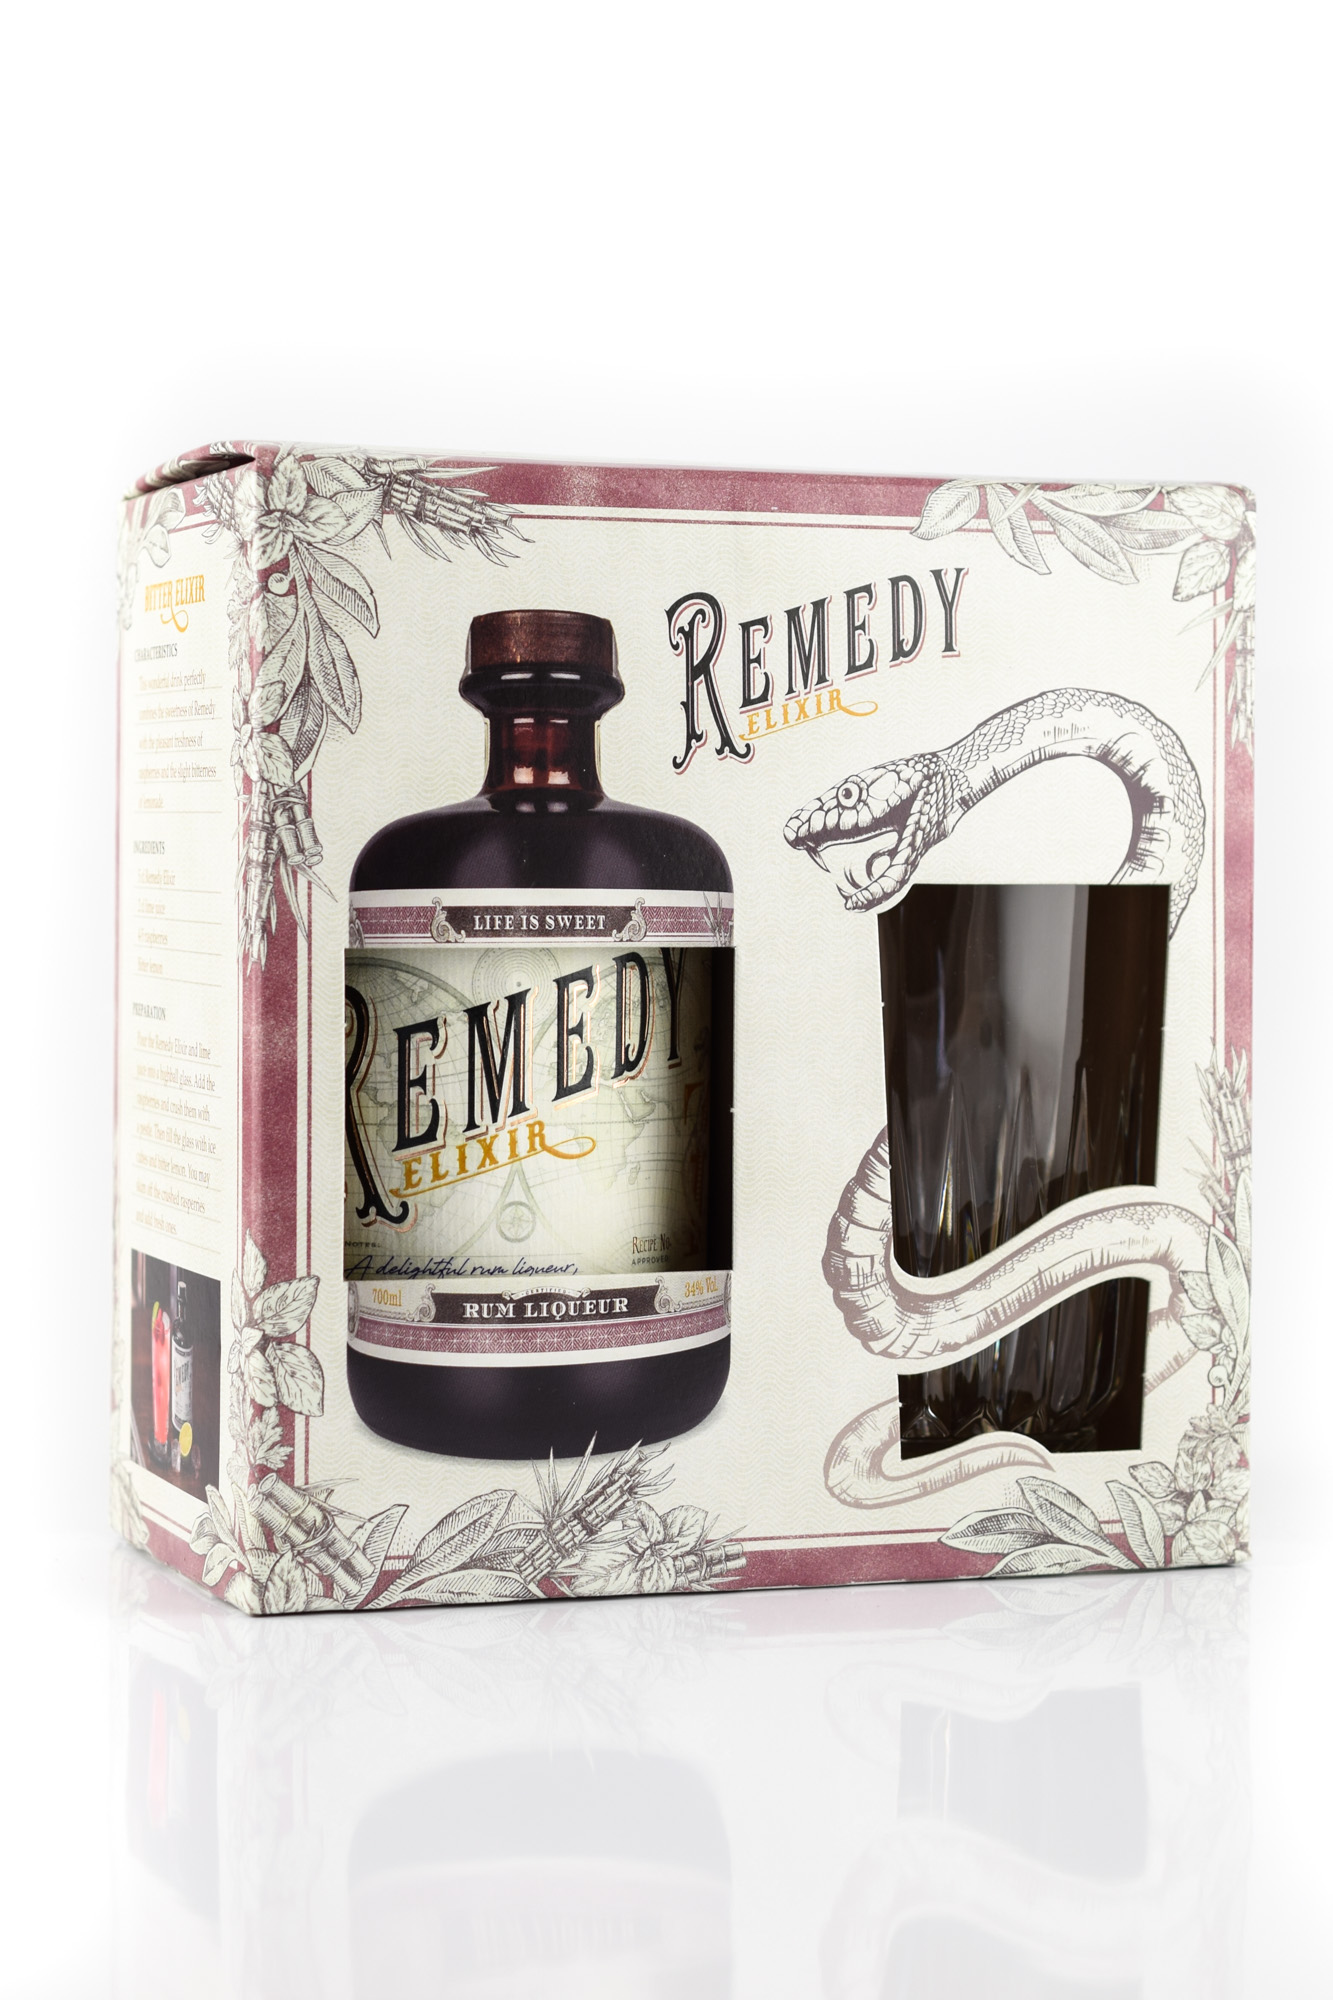 Remedy mit ideas 0,7l | of Packs | | Gift Glas Malts Home Gift Elixir 34%vol.